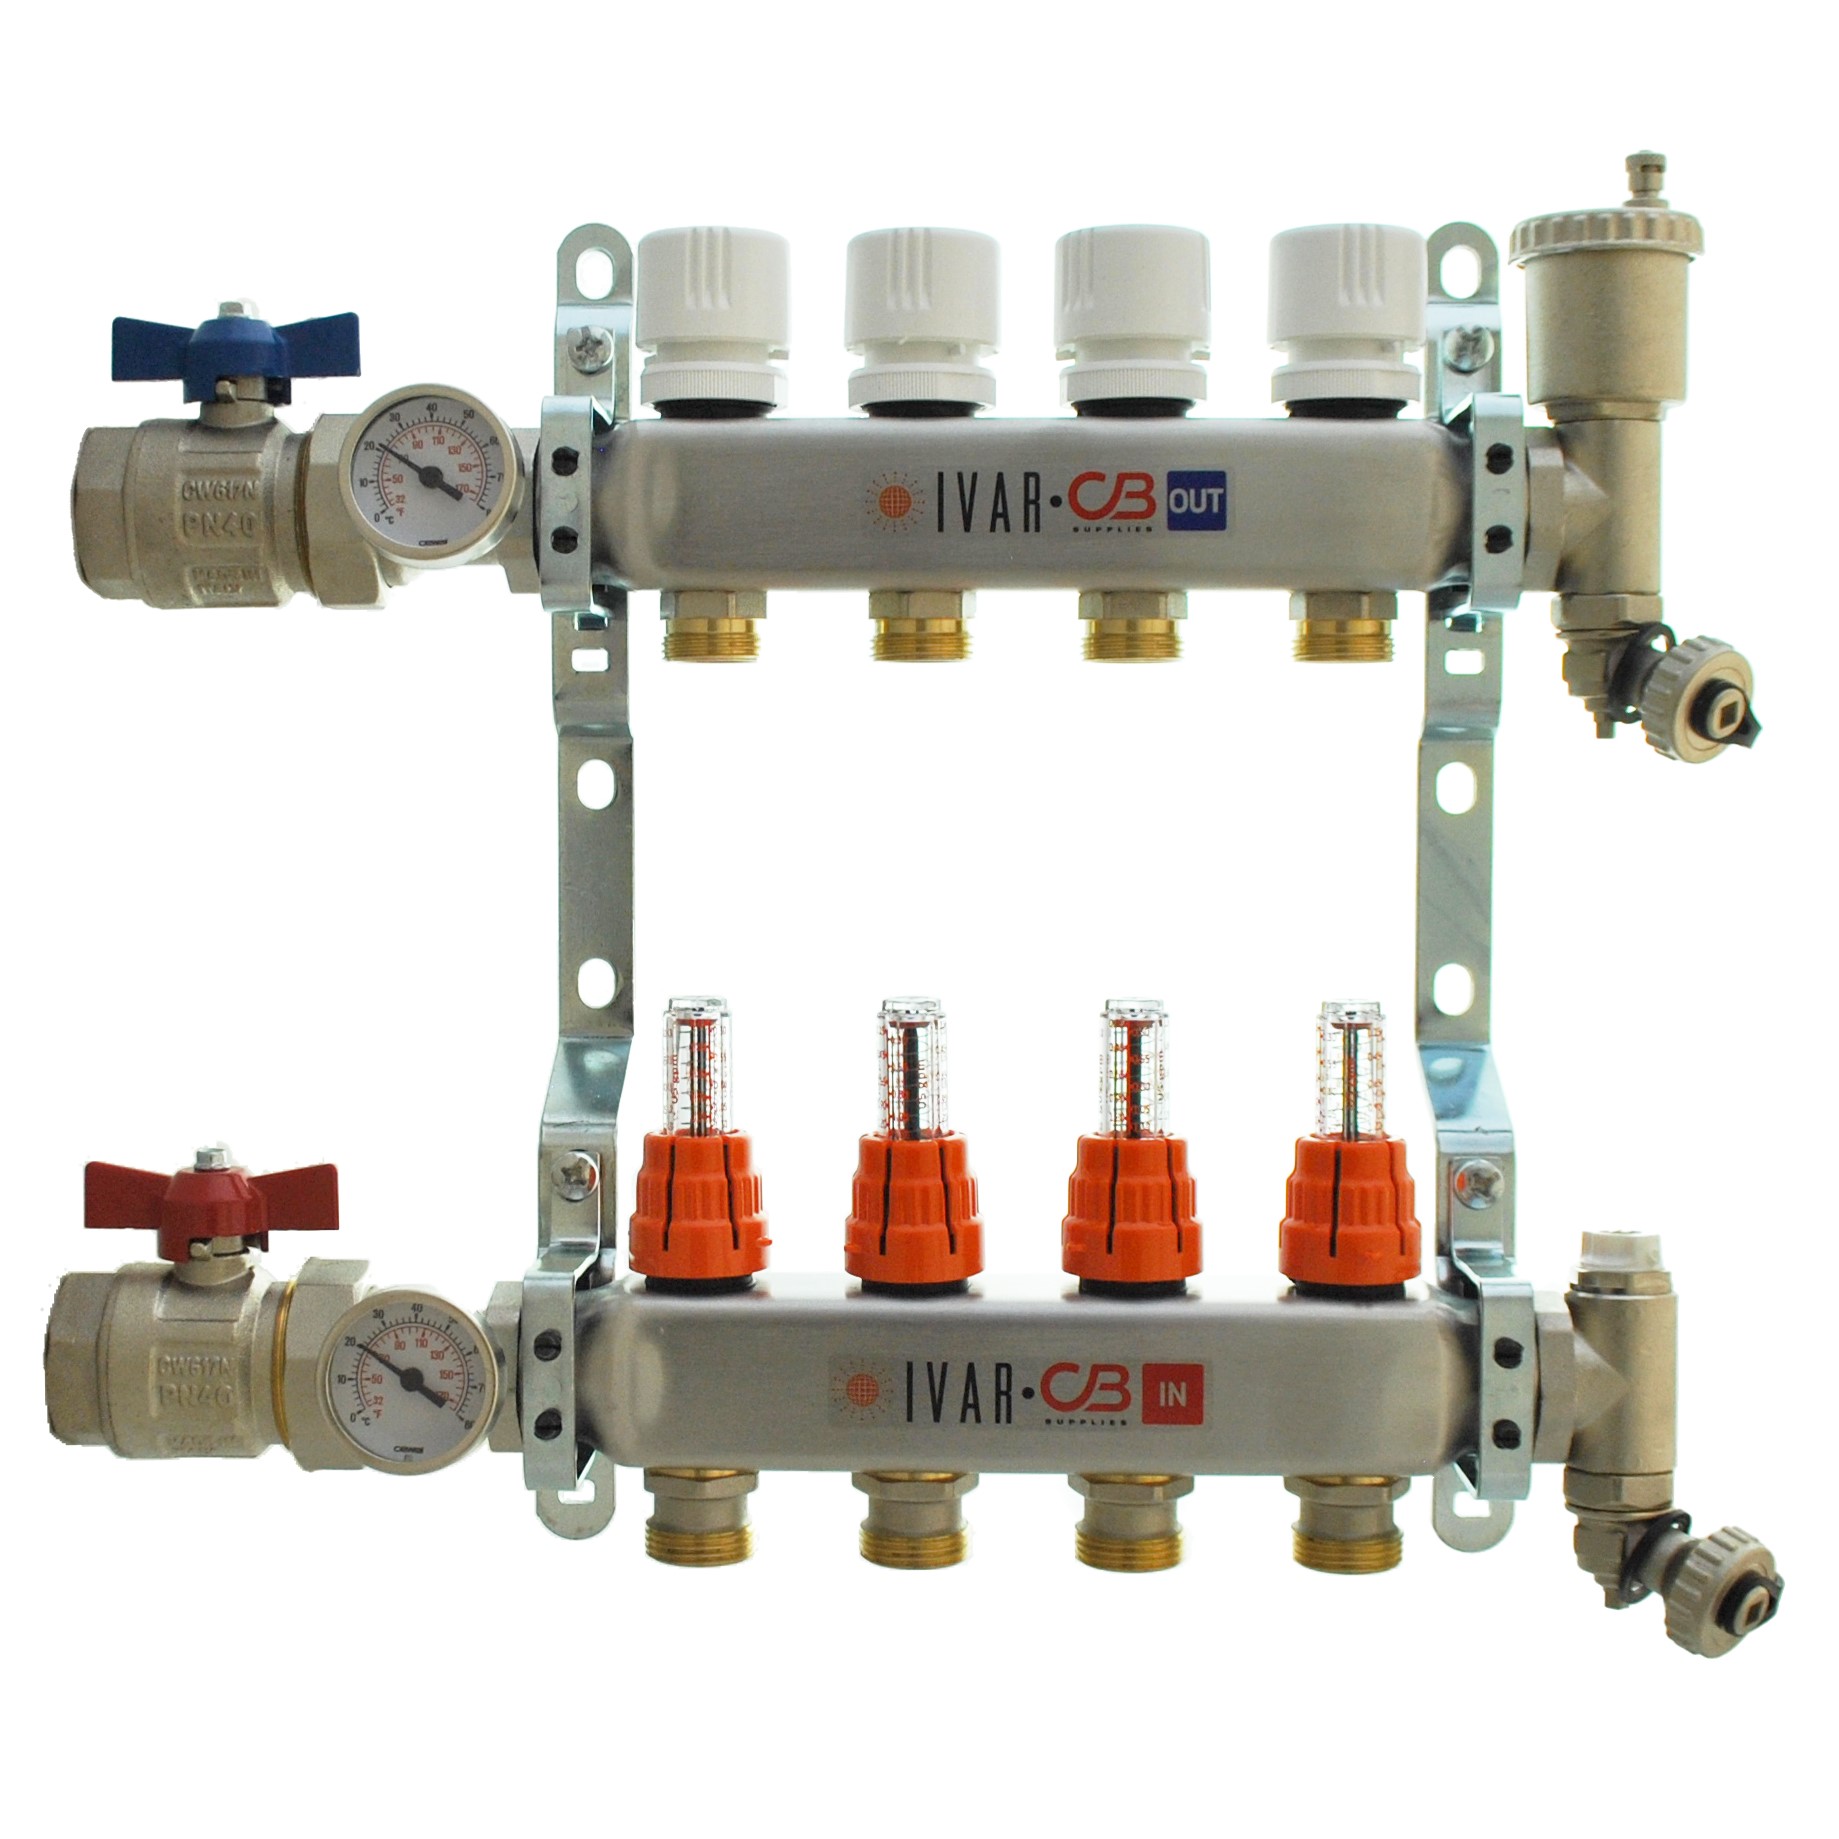 1\" IVAR Stainless Steel Hydronic Manifold for Radiant Floor Heating - 4 ports